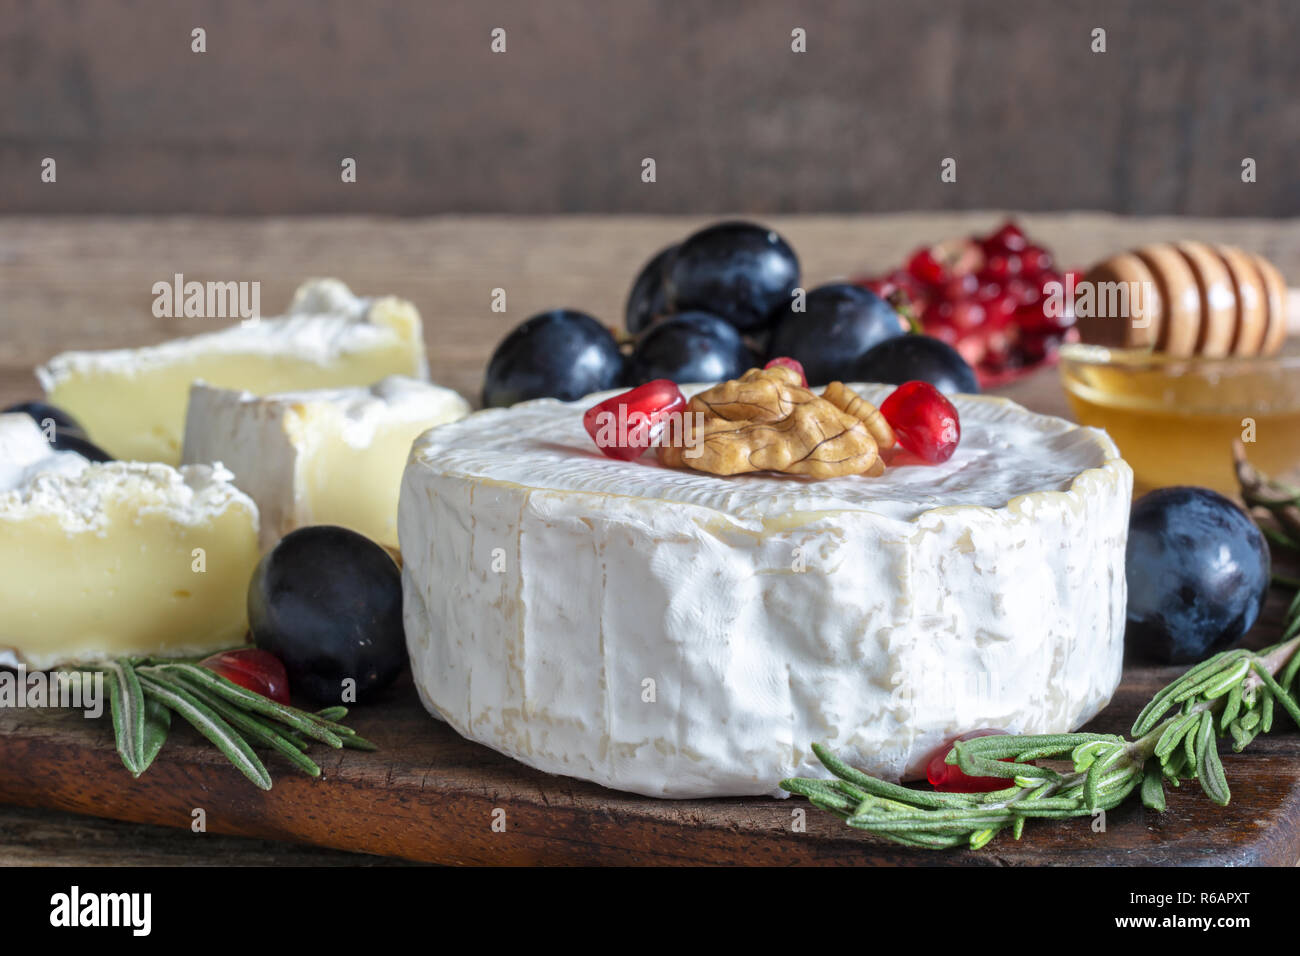 delicious camembert cheese with grapes, pomegranate seeds, honey walnuts and rosemary on wooden cutting board. close up Stock Photo